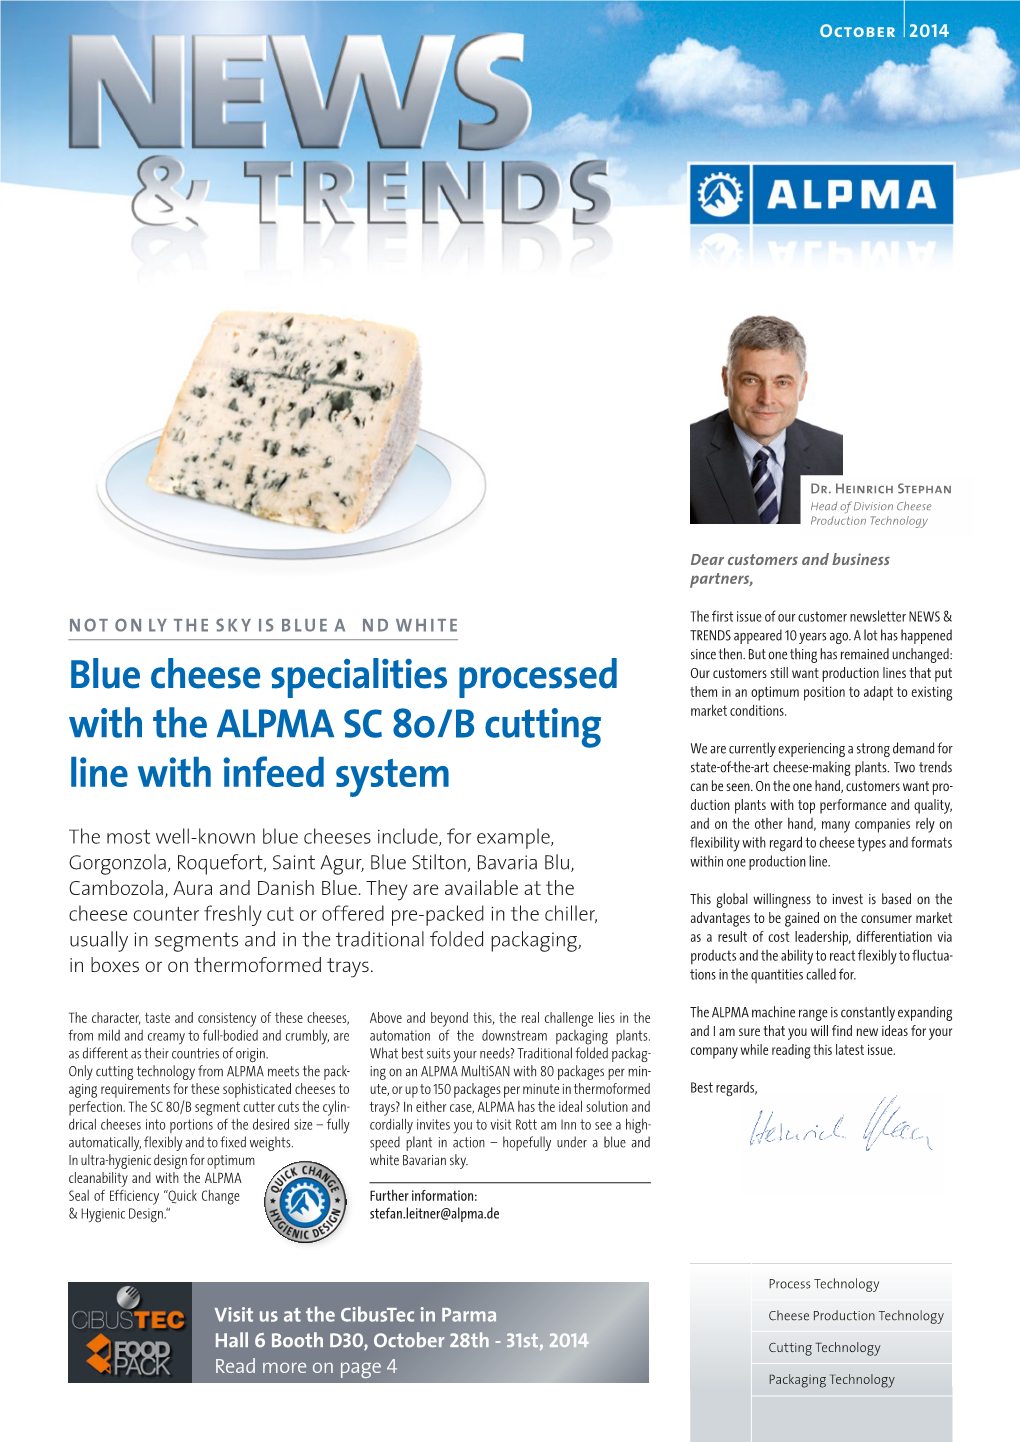 Blue Cheese Specialities Processed with the ALPMA SC 80/B Cutting Line with Infeed System